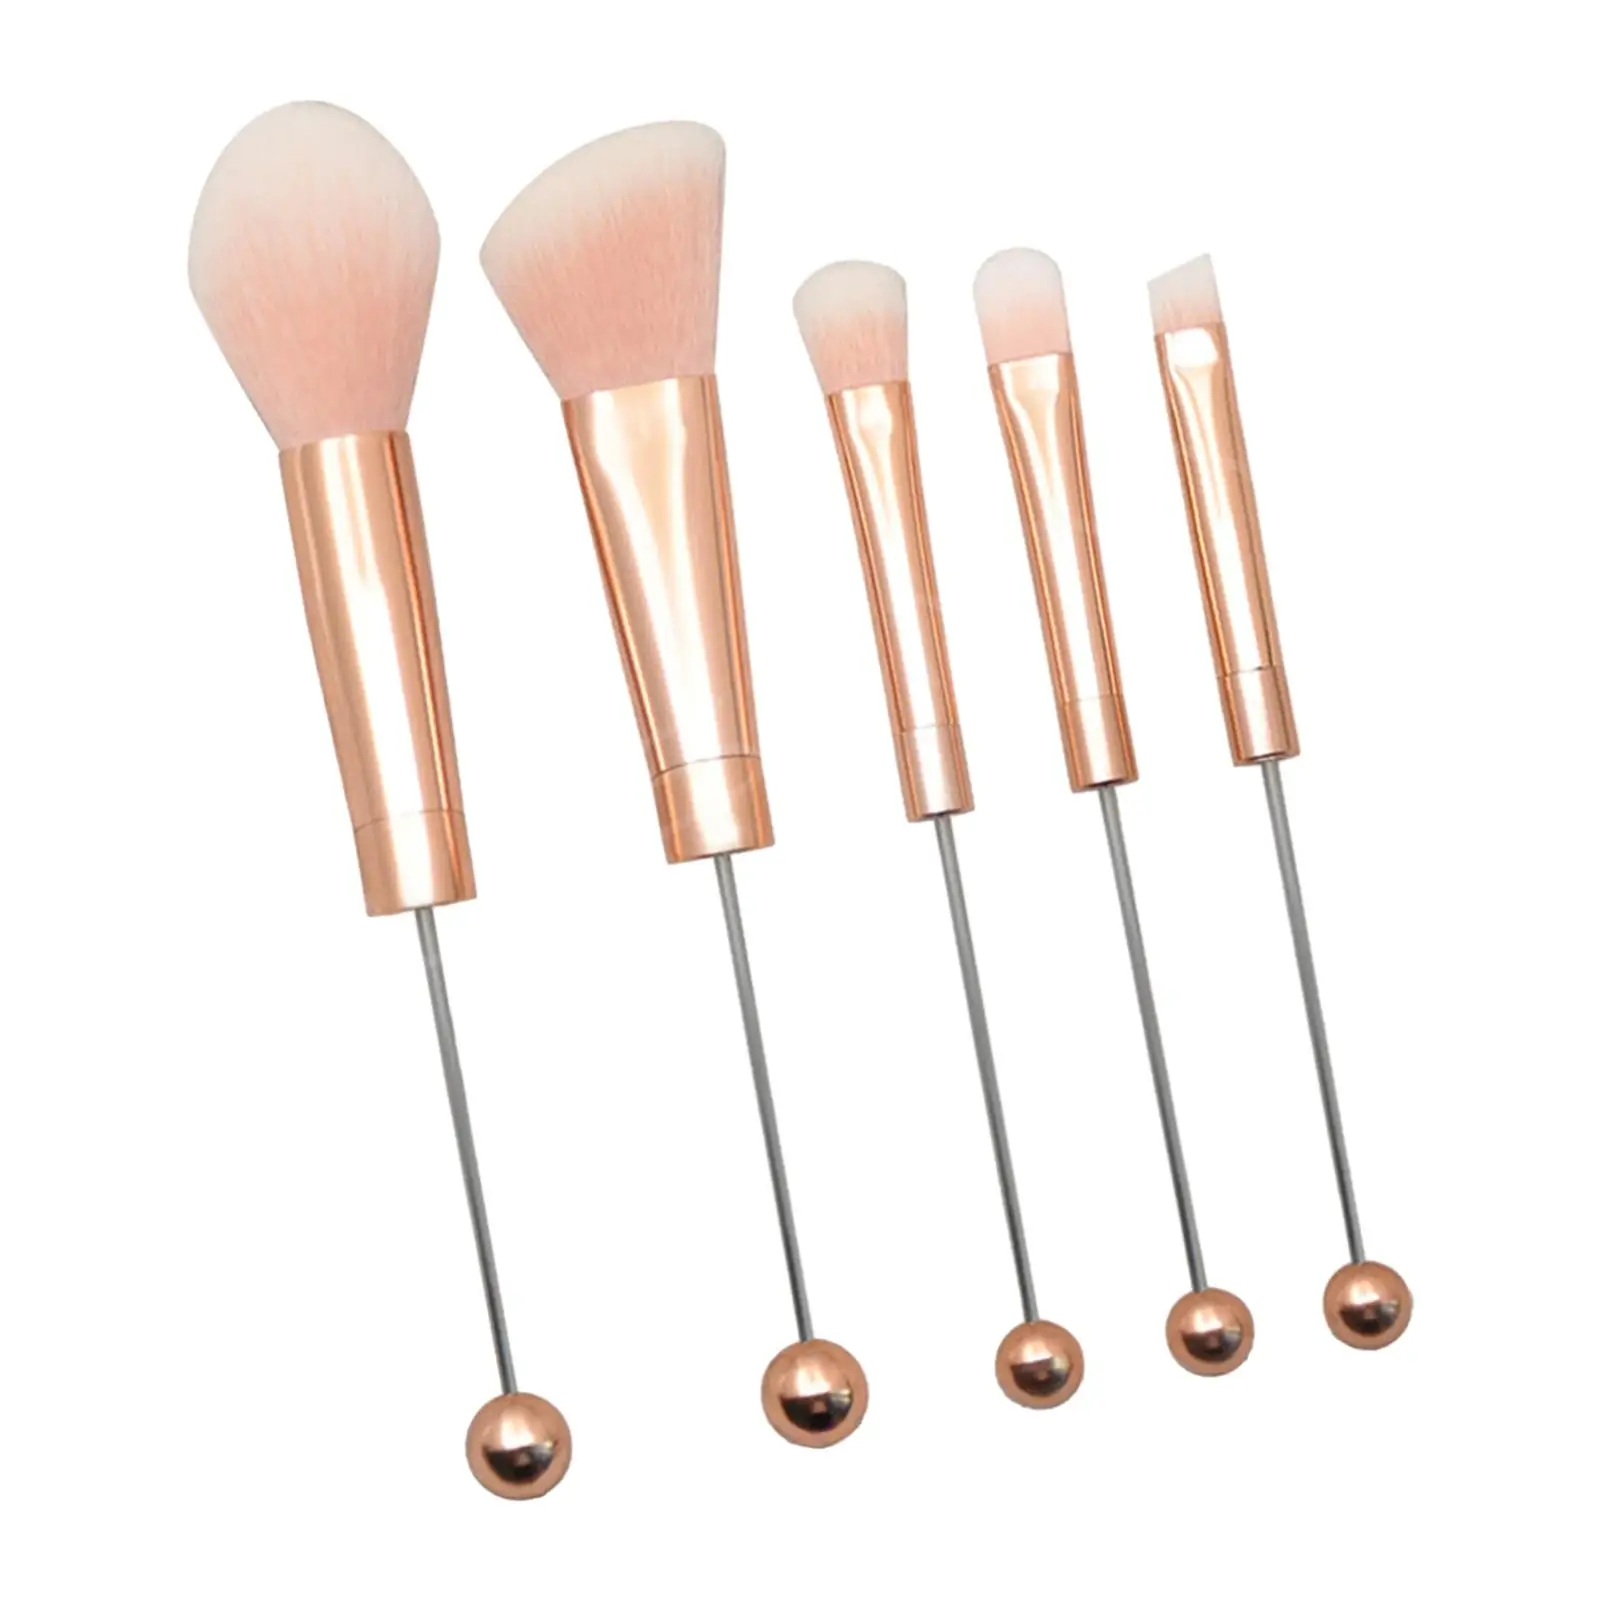 5 Pieces Beaded Eye Shadow Blush Angled Brush DIY Blush Brush Make up Brushes Tool Kits for Bestie Girlfriend Lady Sister Gifts